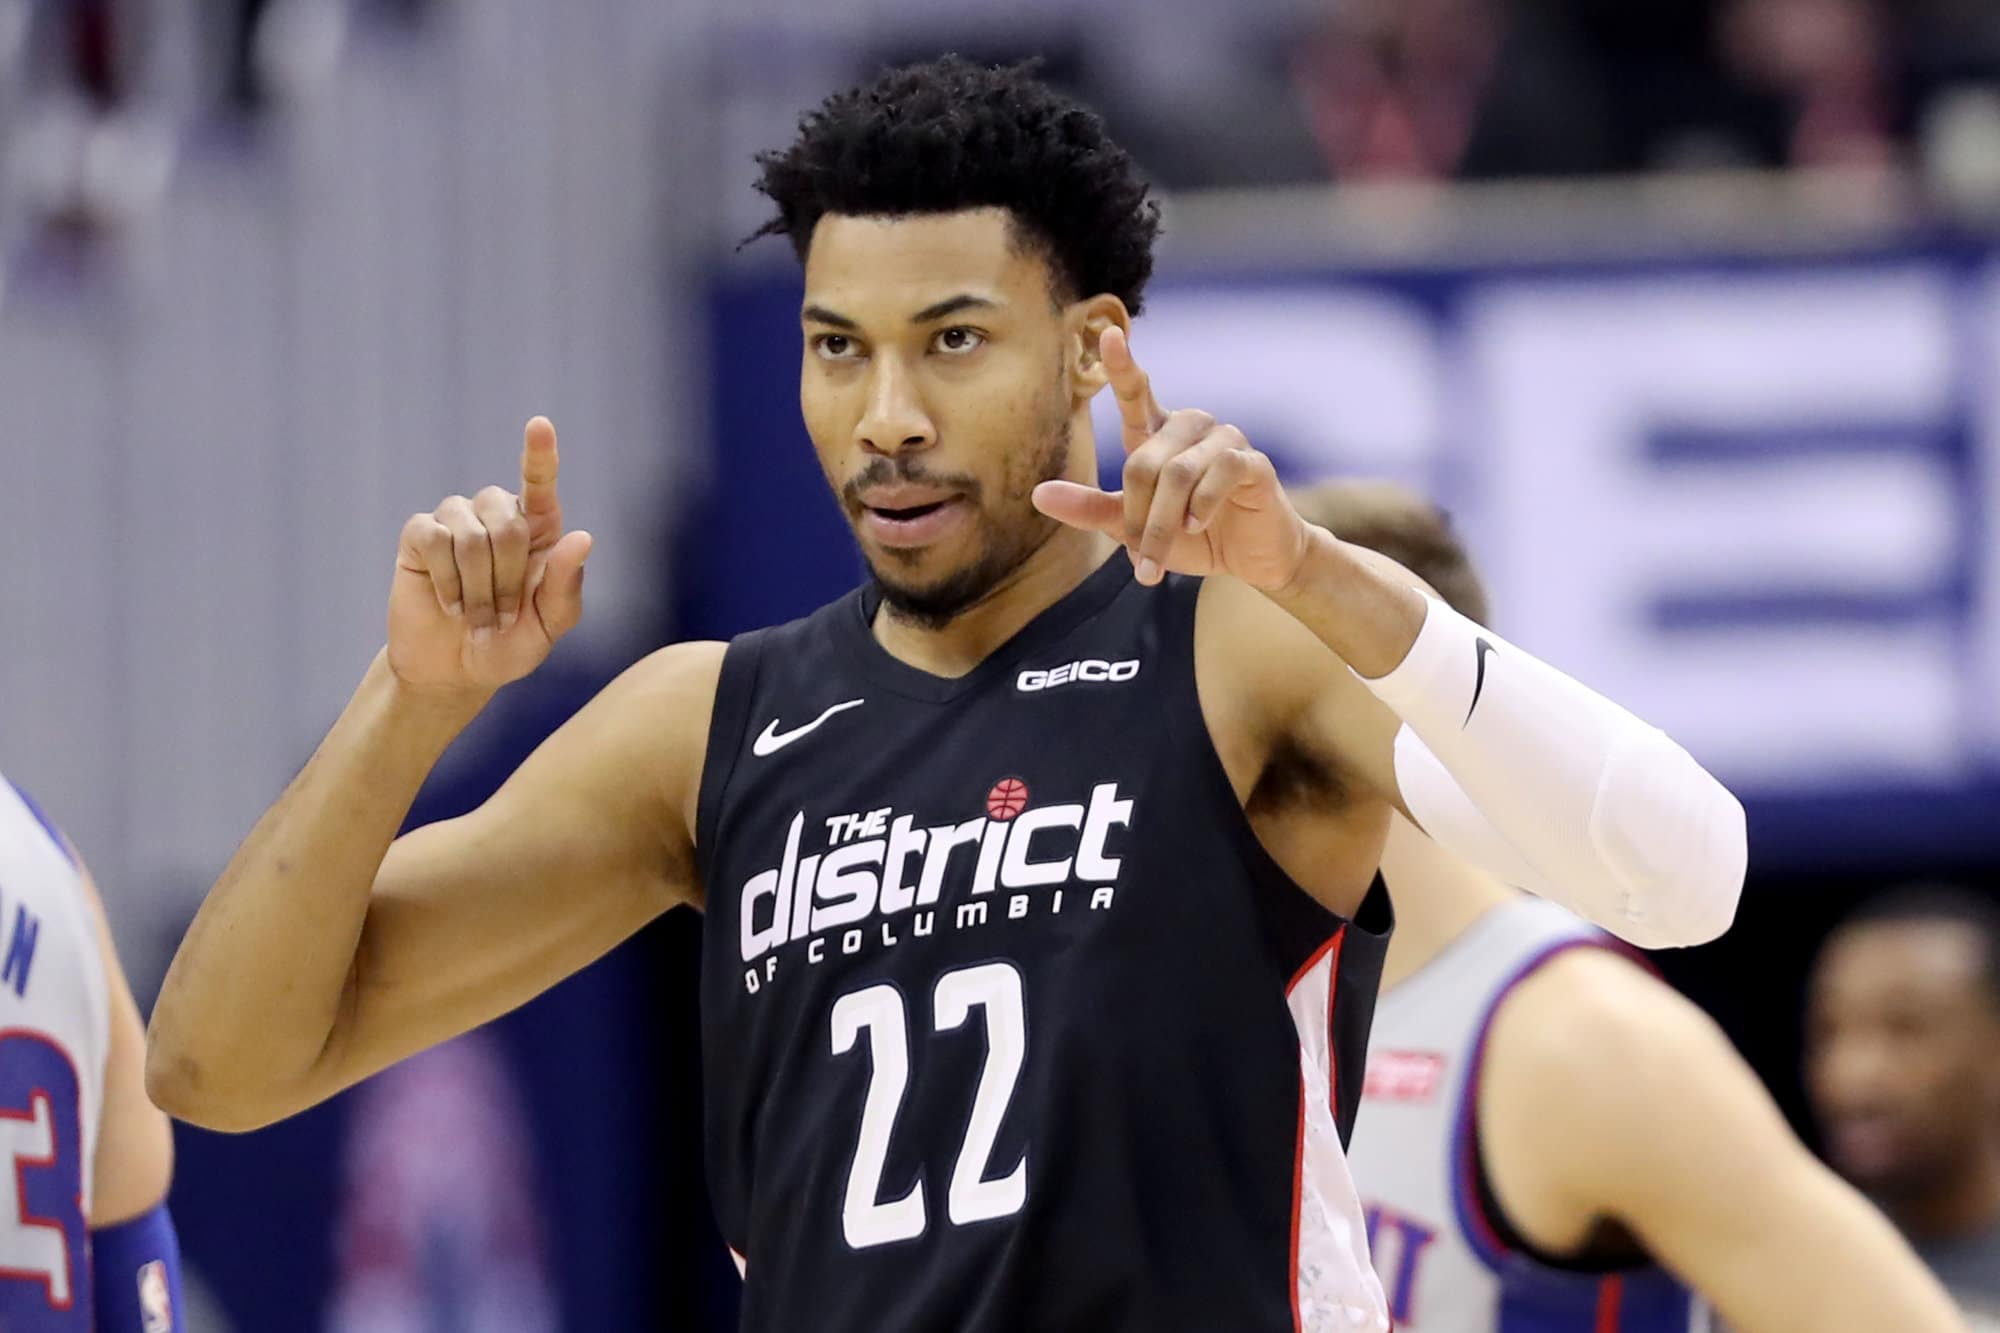 WASHINGTON, DC - JANUARY 21: Otto Porter Jr. #22 of the Washington Wizards celebrates after hitting a three pointer against the Detroit Pistons in the first half at Capital One Arena on January 21, 2019 in Washington, DC. NOTE TO USER: User expressly acknowledges and agrees that, by downloading and or using this photograph, User is consenting to the terms and conditions of the Getty Images License Agreement. (Photo by Rob Carr/Getty Images)